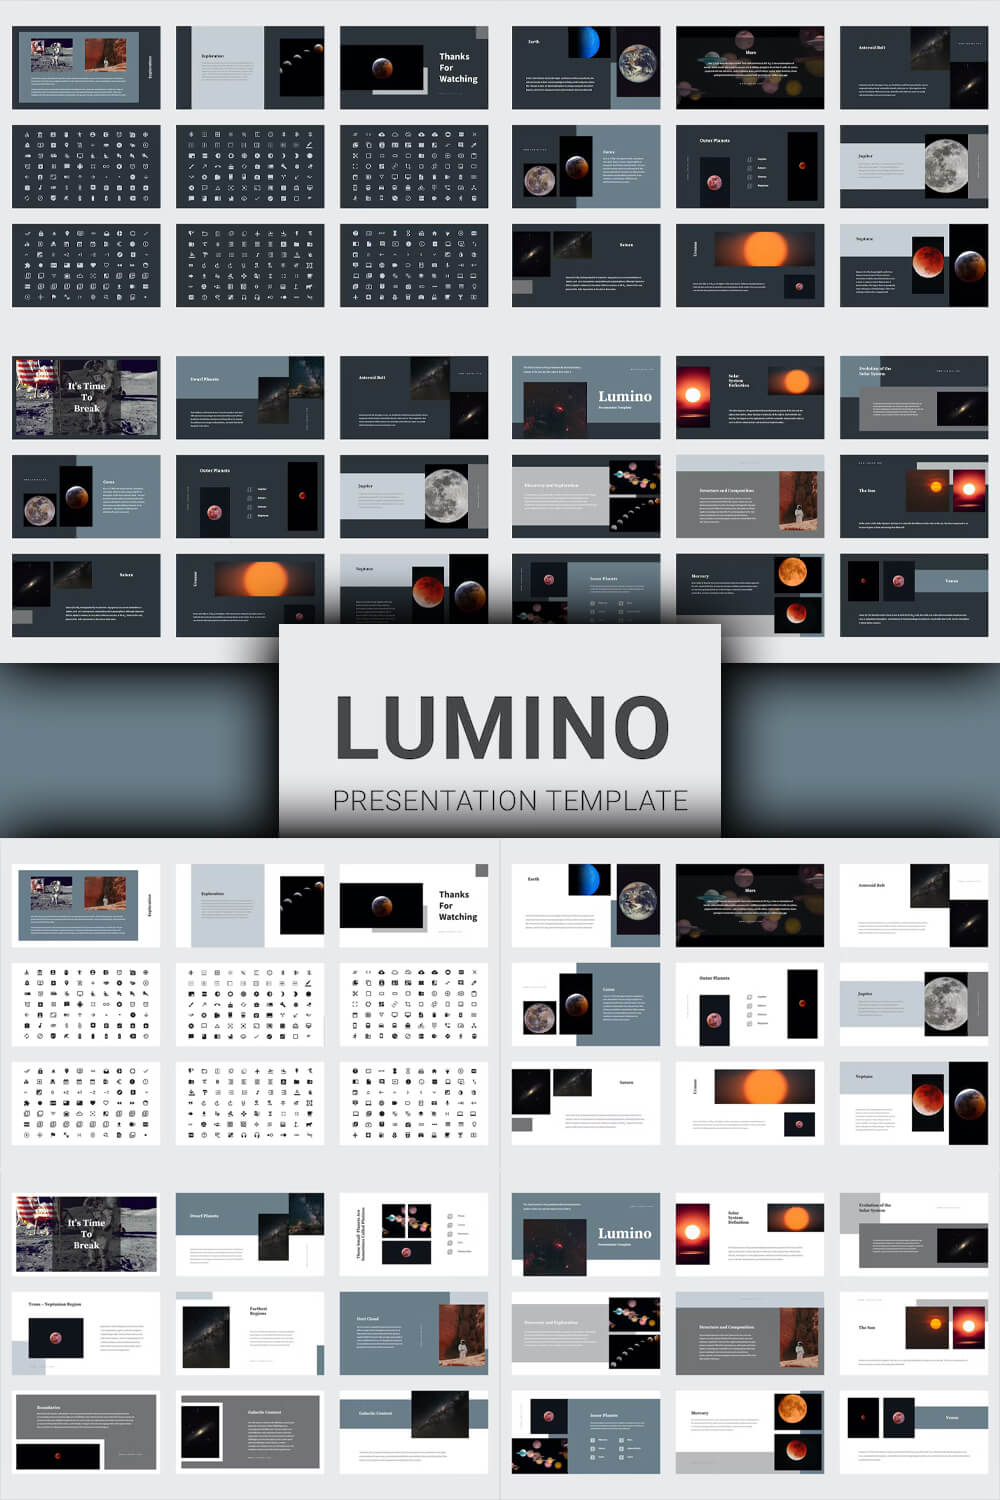 Icons and planets of Lumino - Solar System Education Powerpoint.